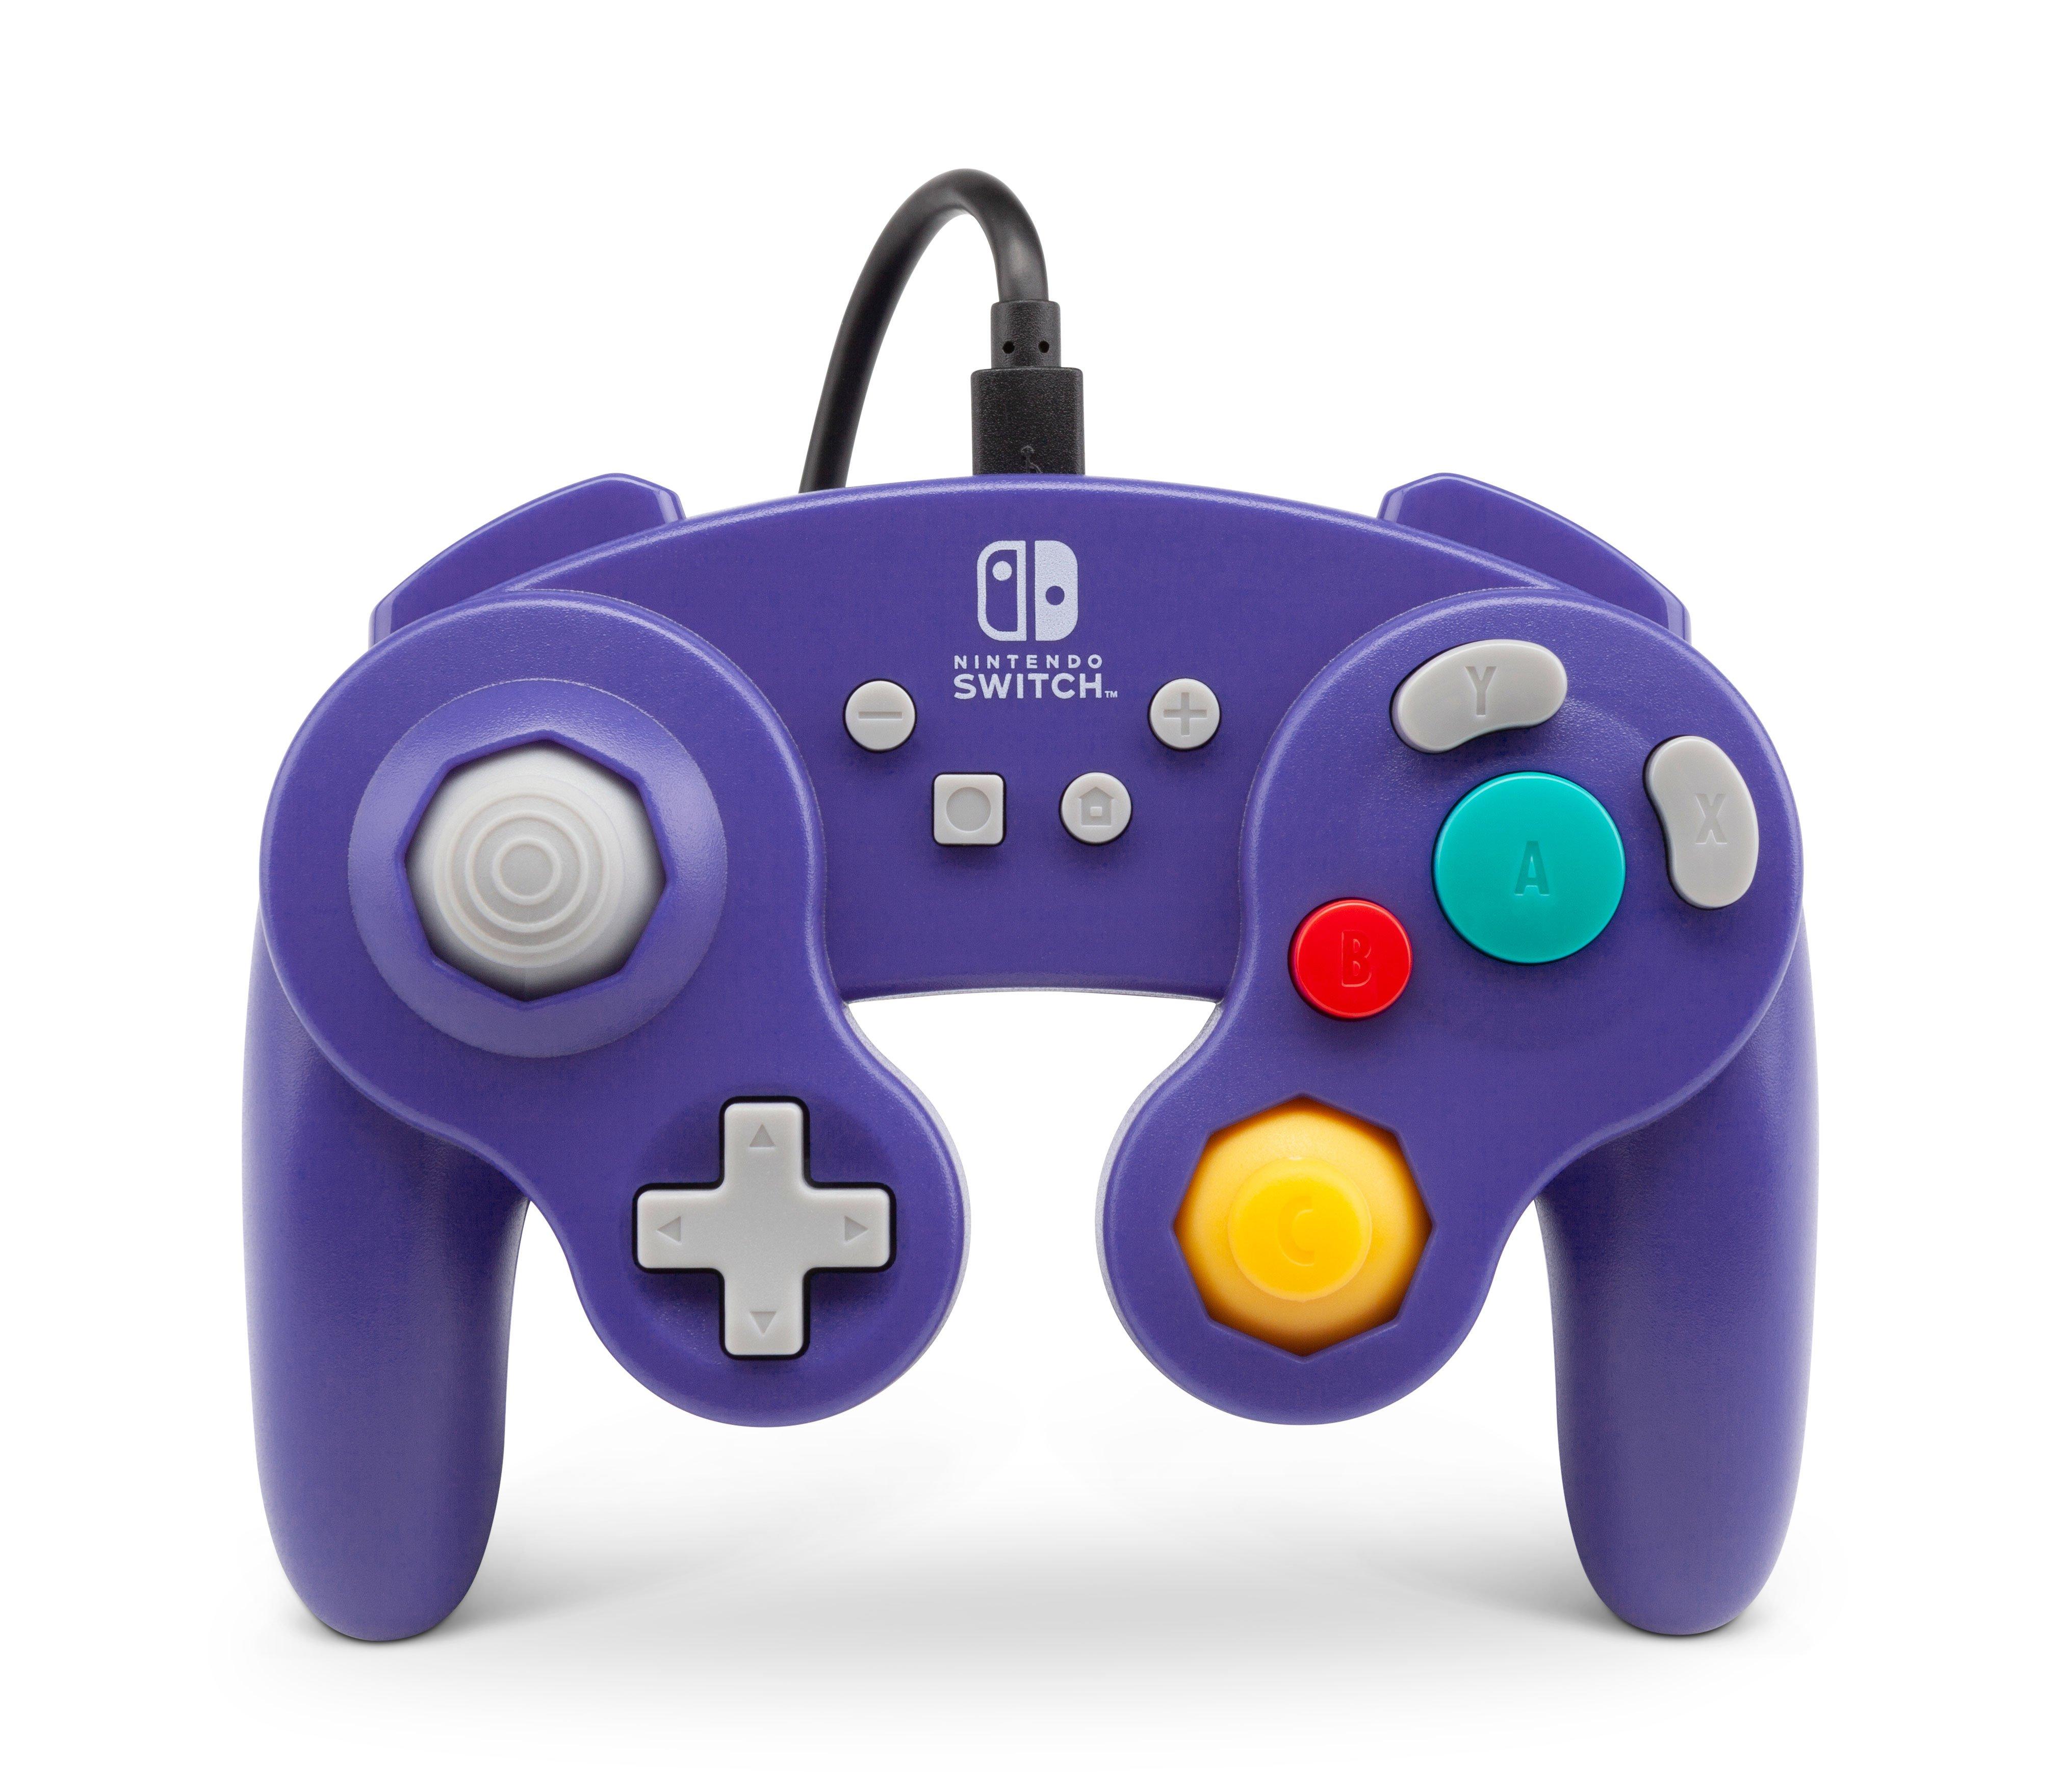 PowerA GameCube Style Wired Controller for Nintendo Switch | GameStop